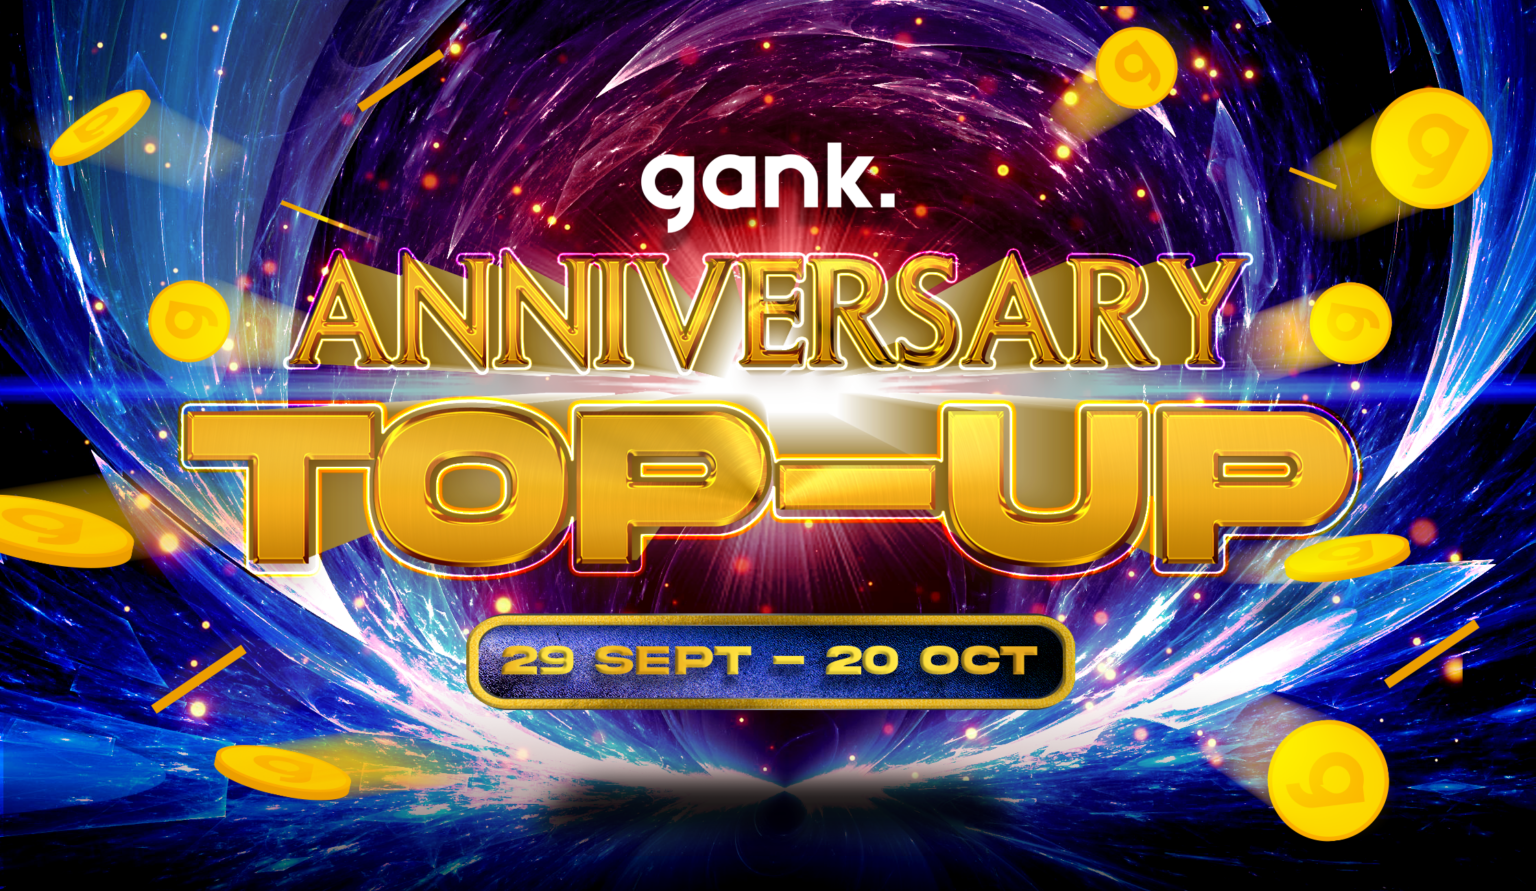 Gank Anniversary Top-up Campaign